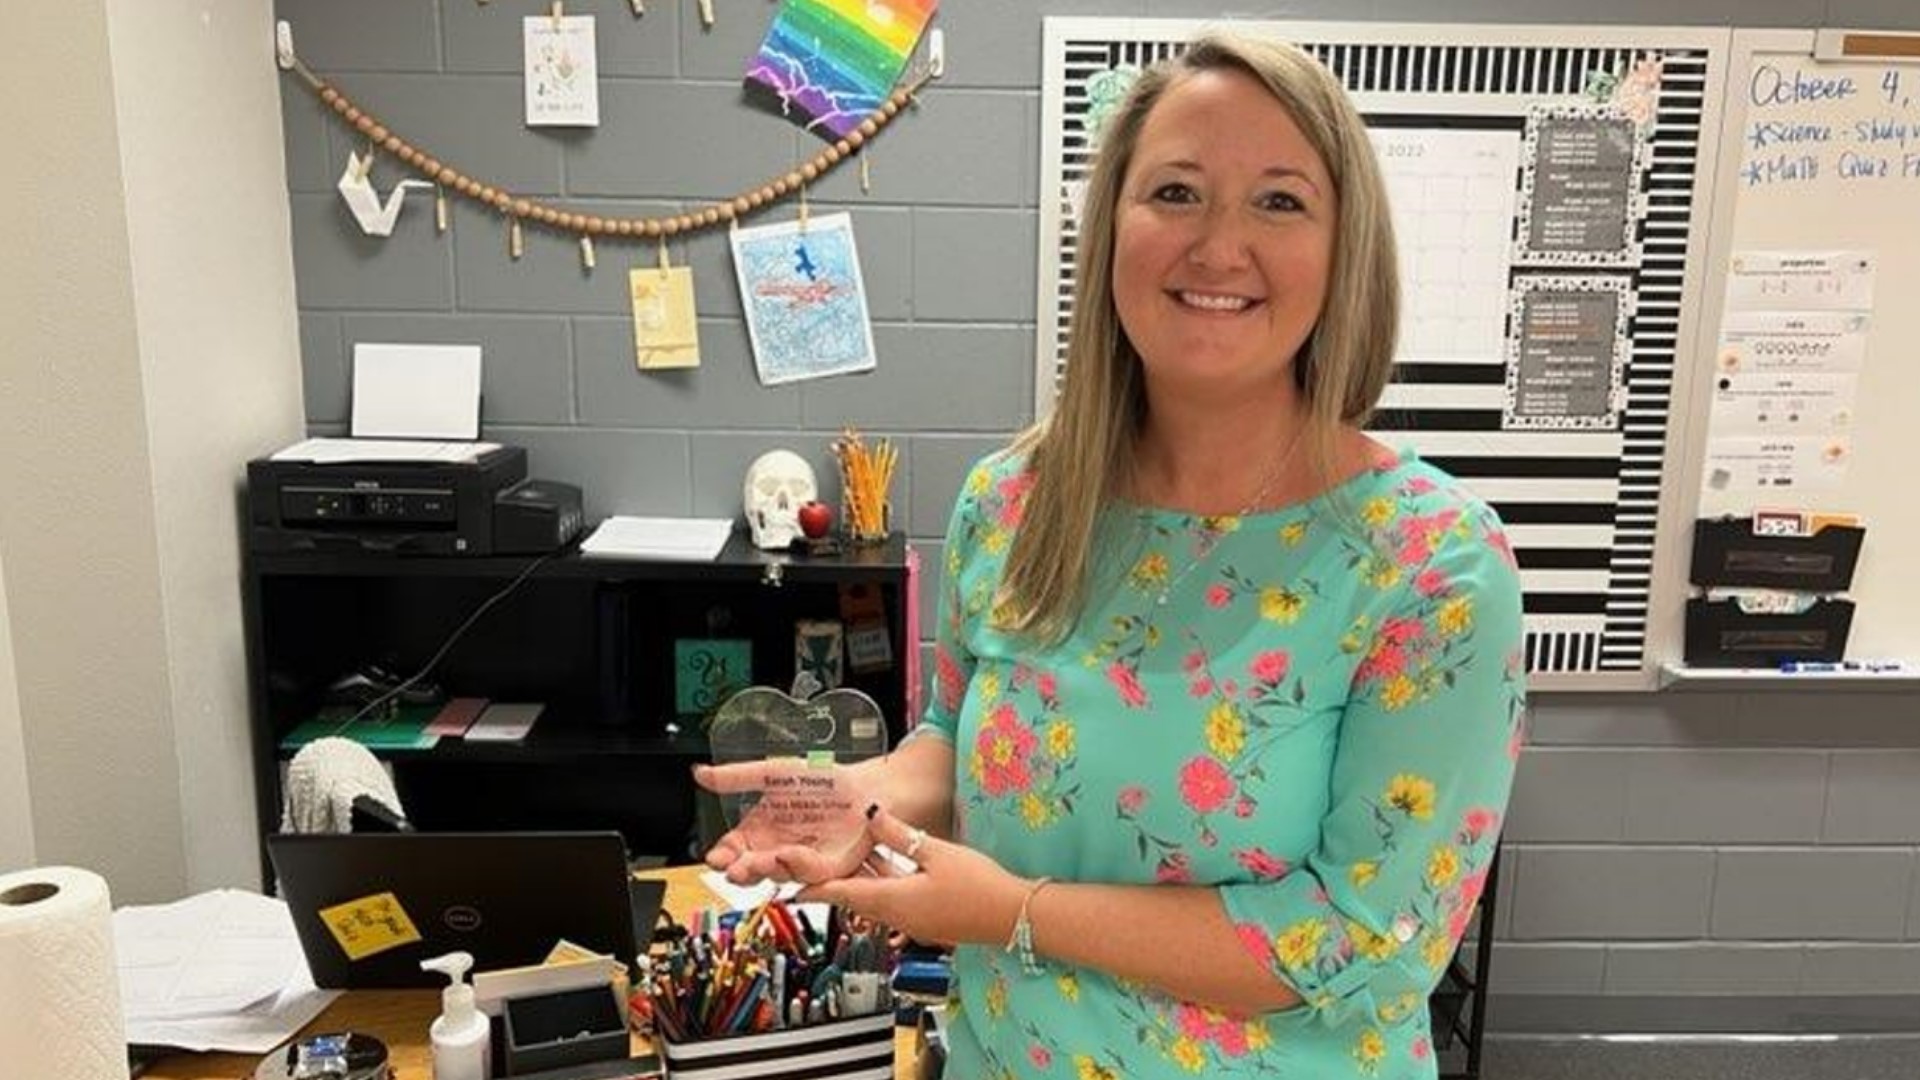 Here's outstanding teacher that won this week's Excel Award!